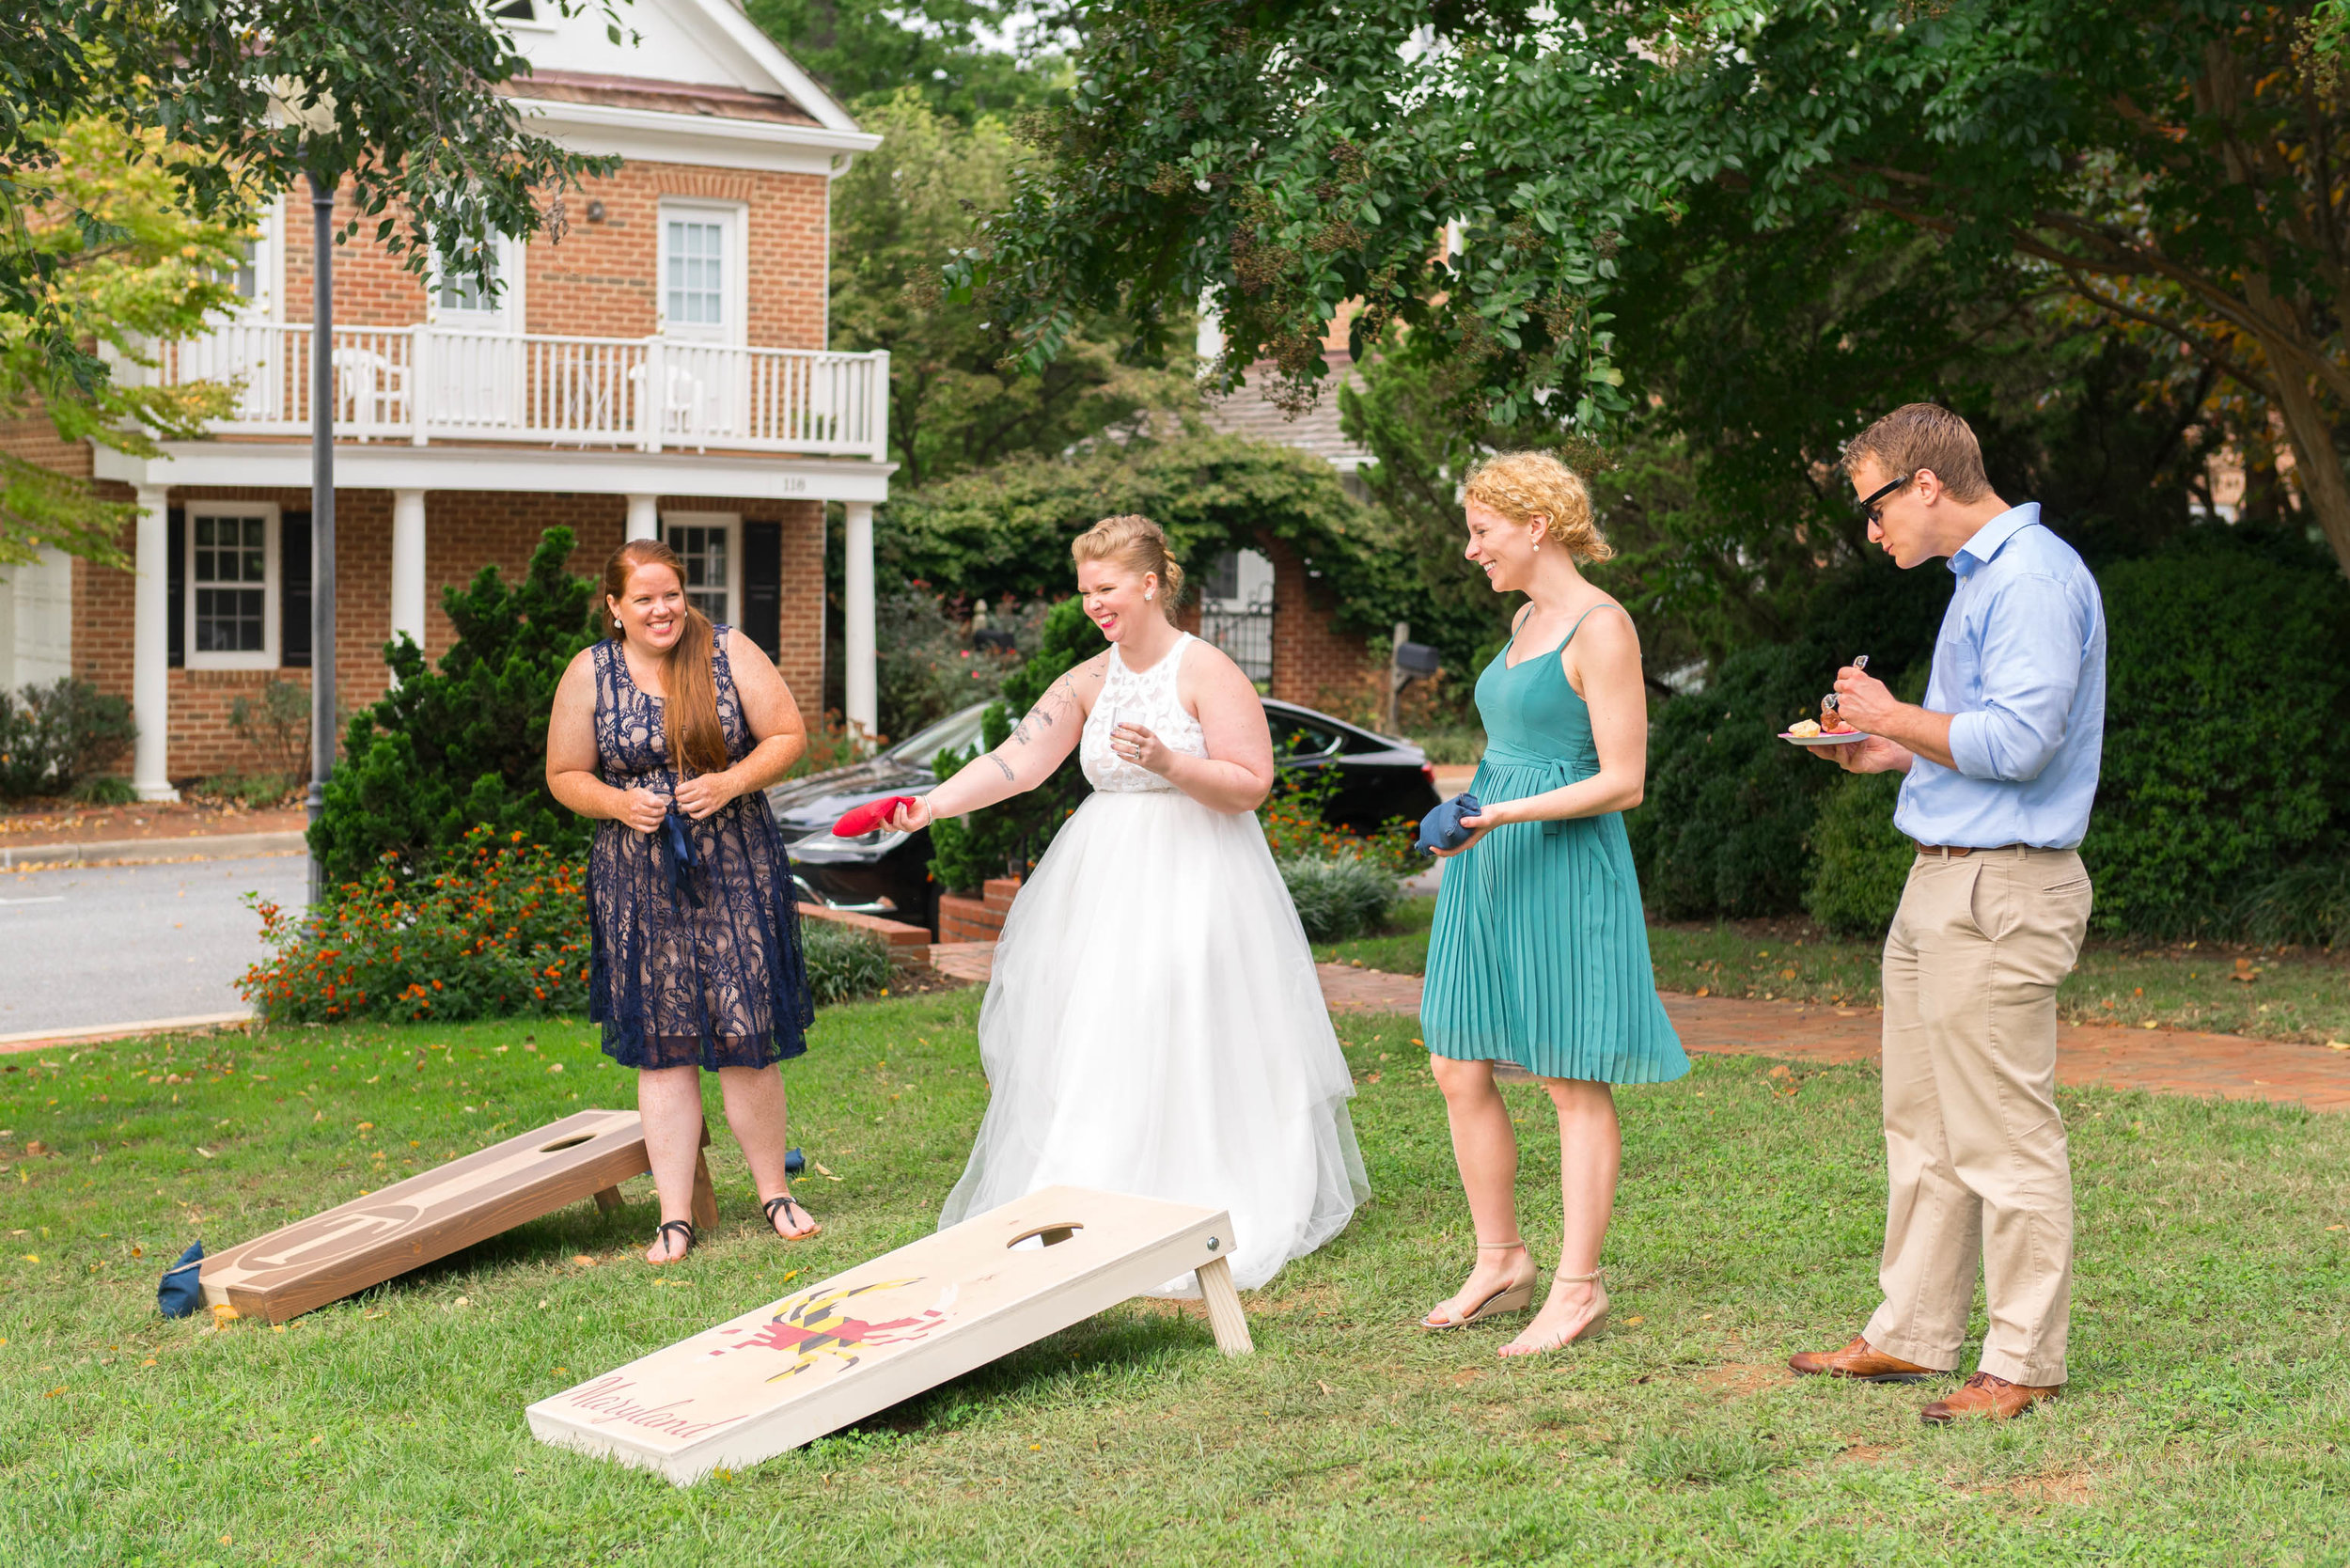 Lawn games for Kentlands Mansion wedding in fall